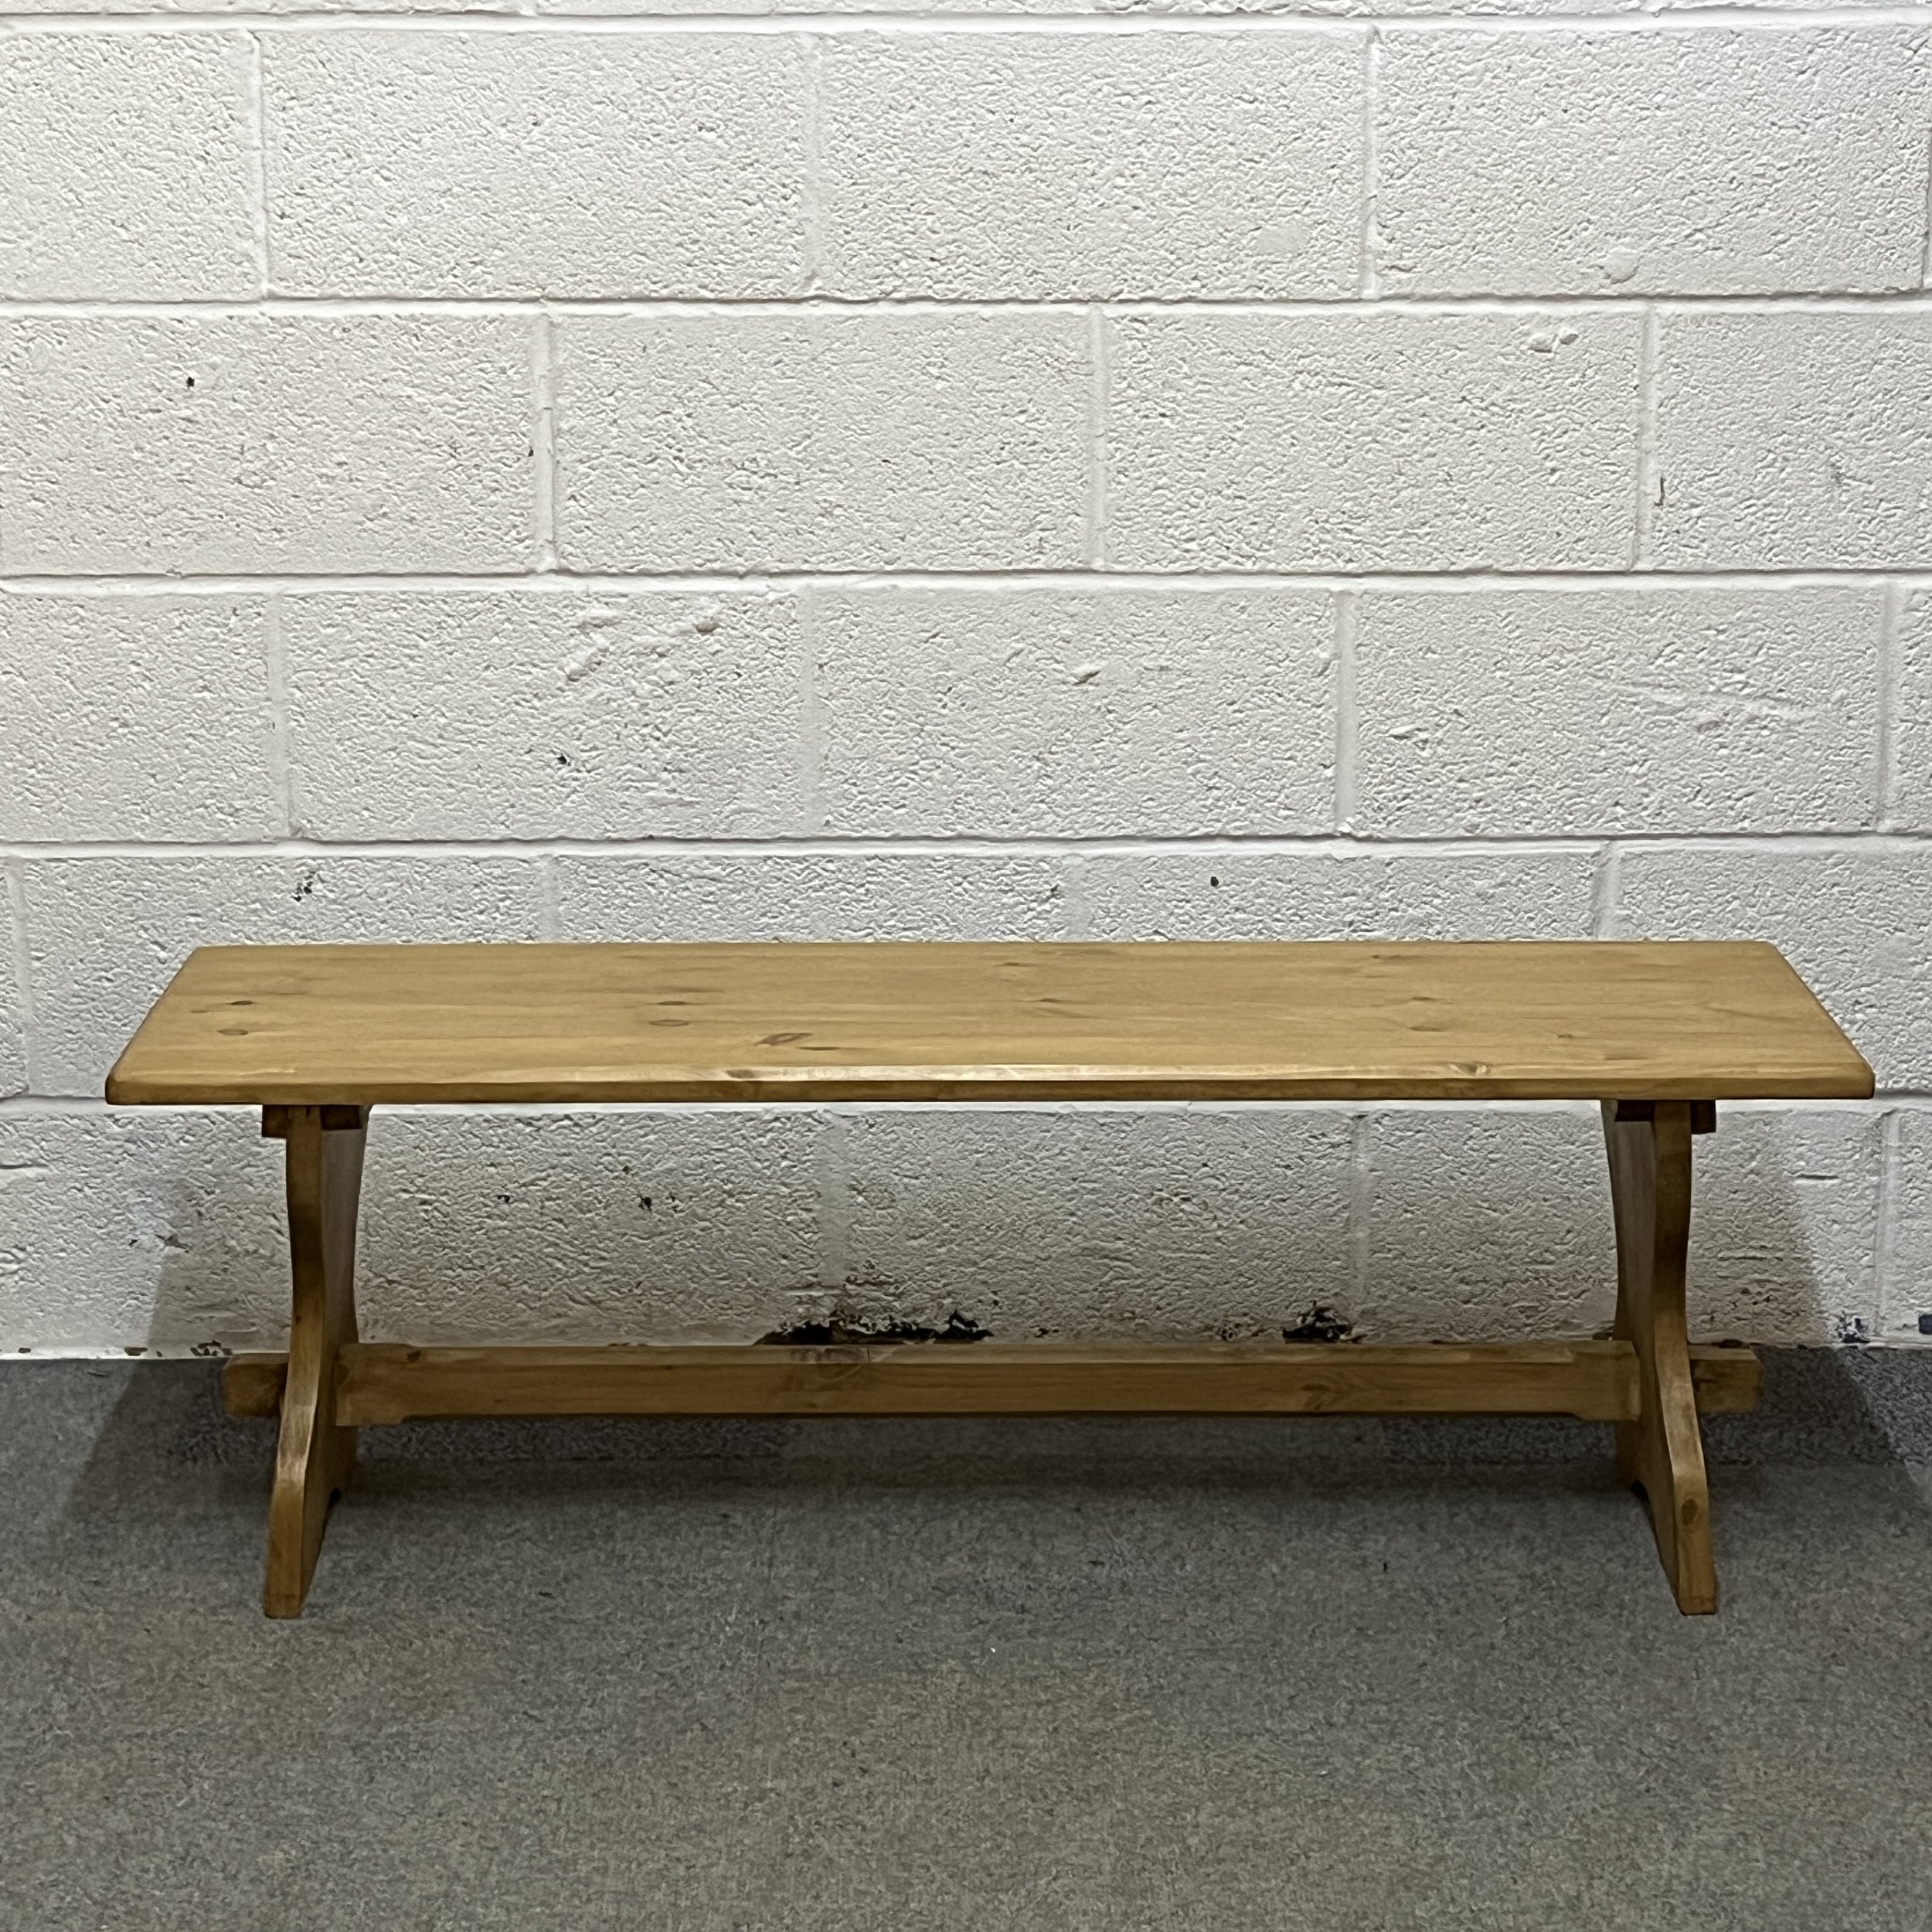 Made to measure pine bench